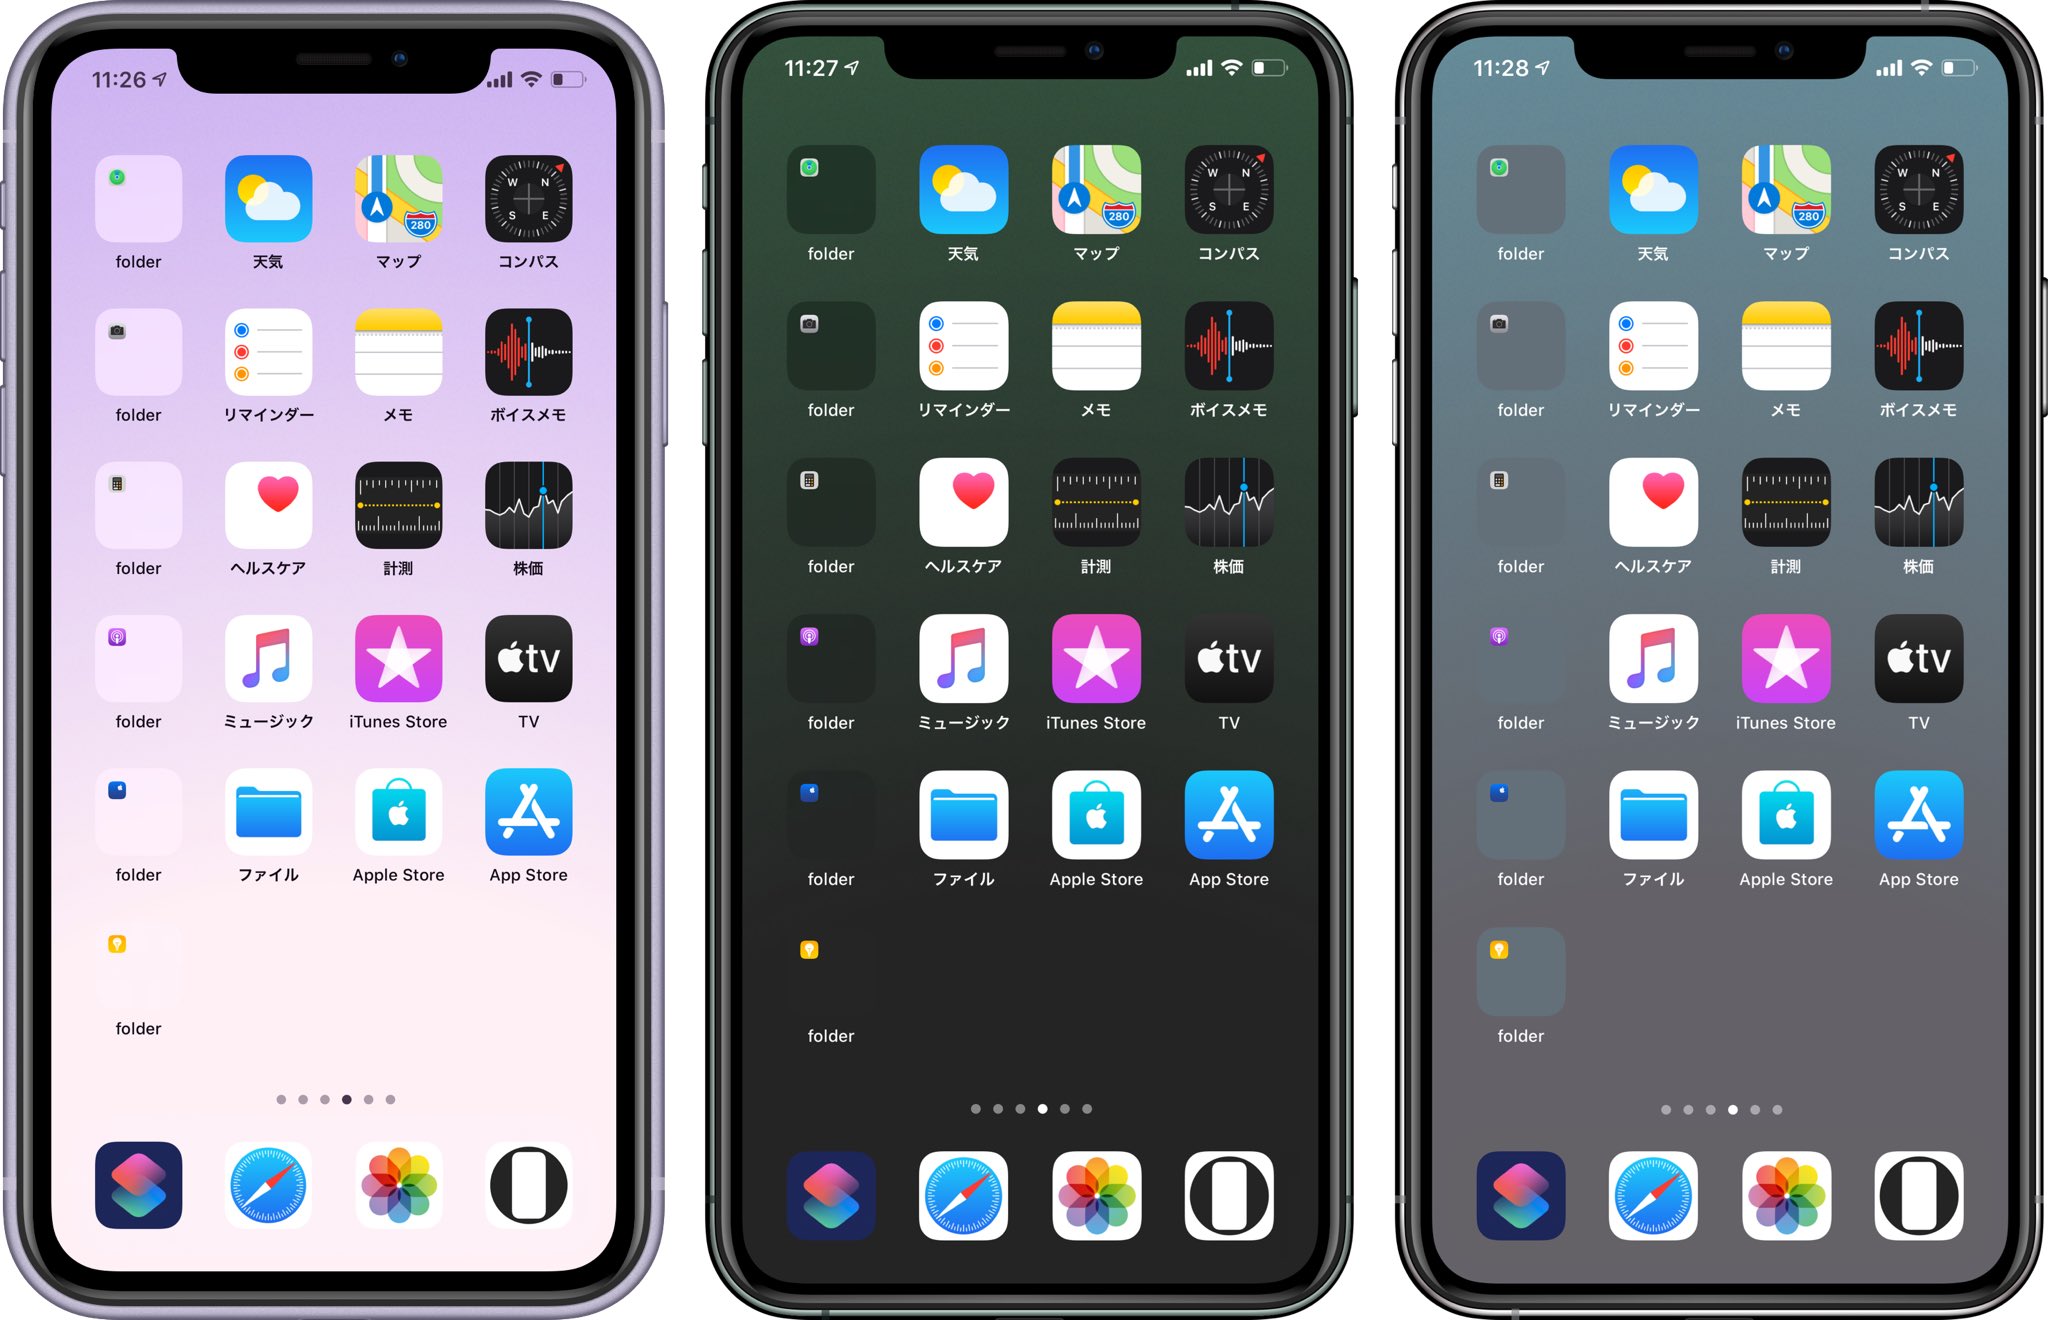 Hide Mysterious Iphone Wallpsper 不思議なiphone壁紙 On Twitter Ios 13のiphone のドックを隠す繊細なグラデーションの壁紙各モード用各10枚 Wallpapers With Delicate Gradients That Hide The Ios 13 Iphone Dock 10 Sheets For Each Mode Https T Co